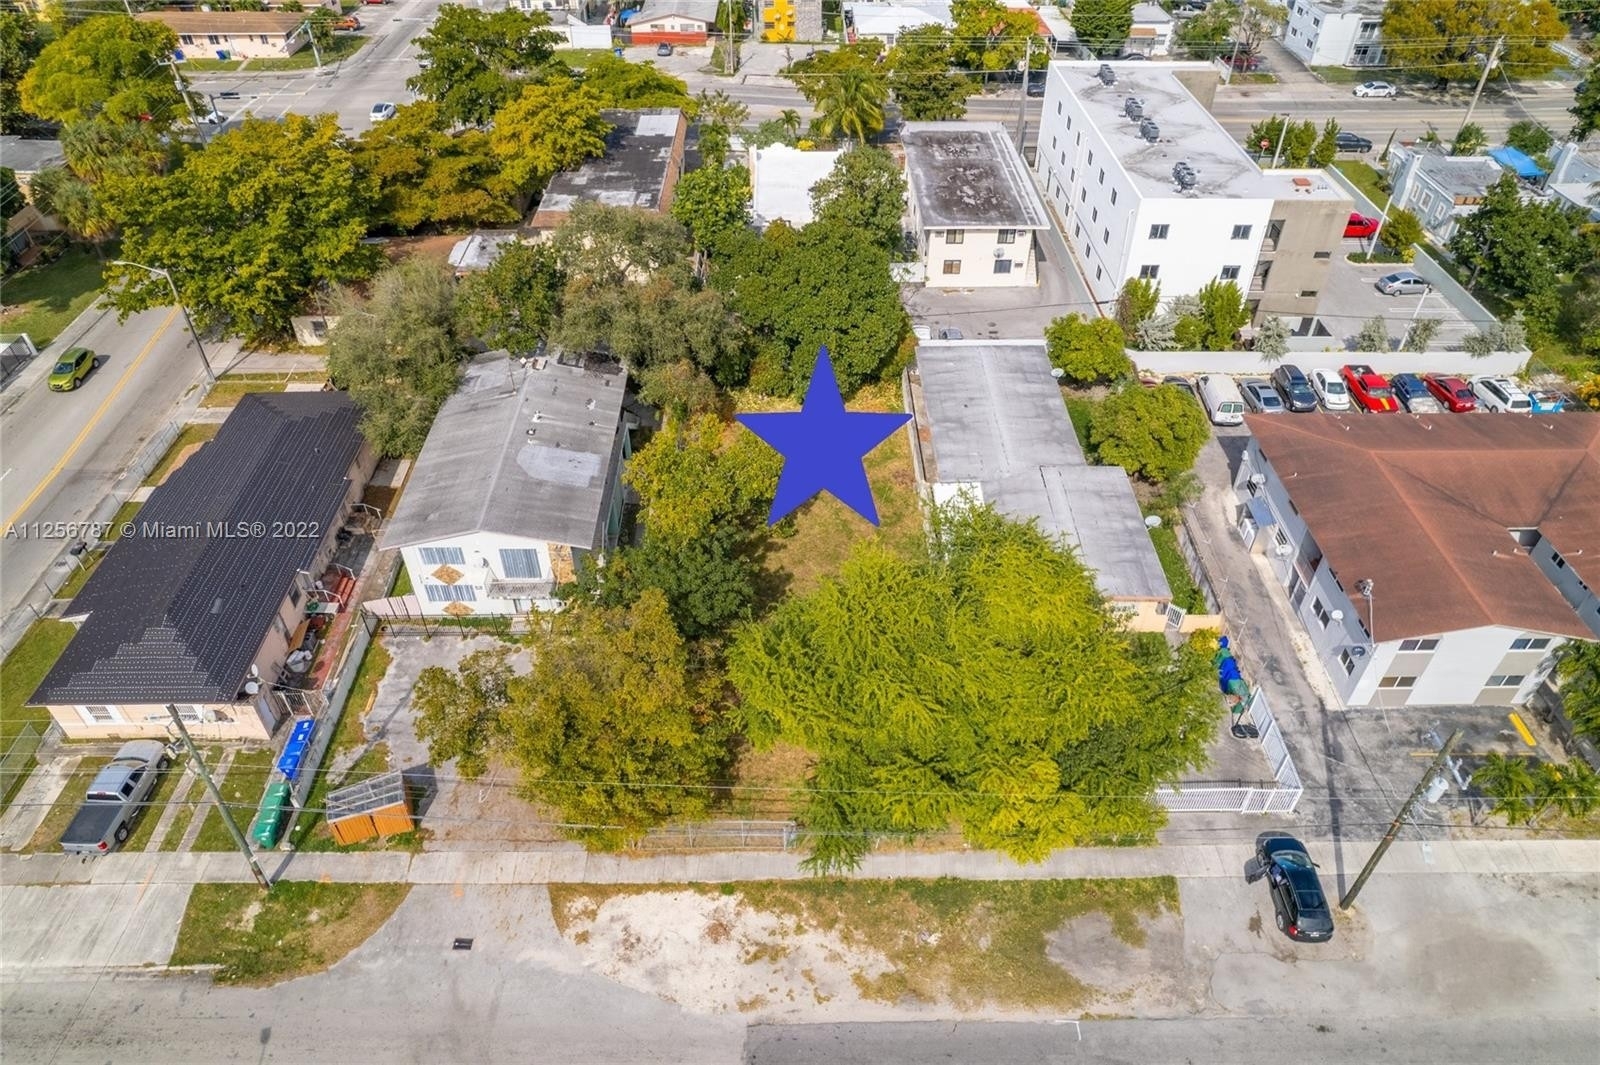 Commercial for Sale at Boulevard Park, Miami, FL 33127